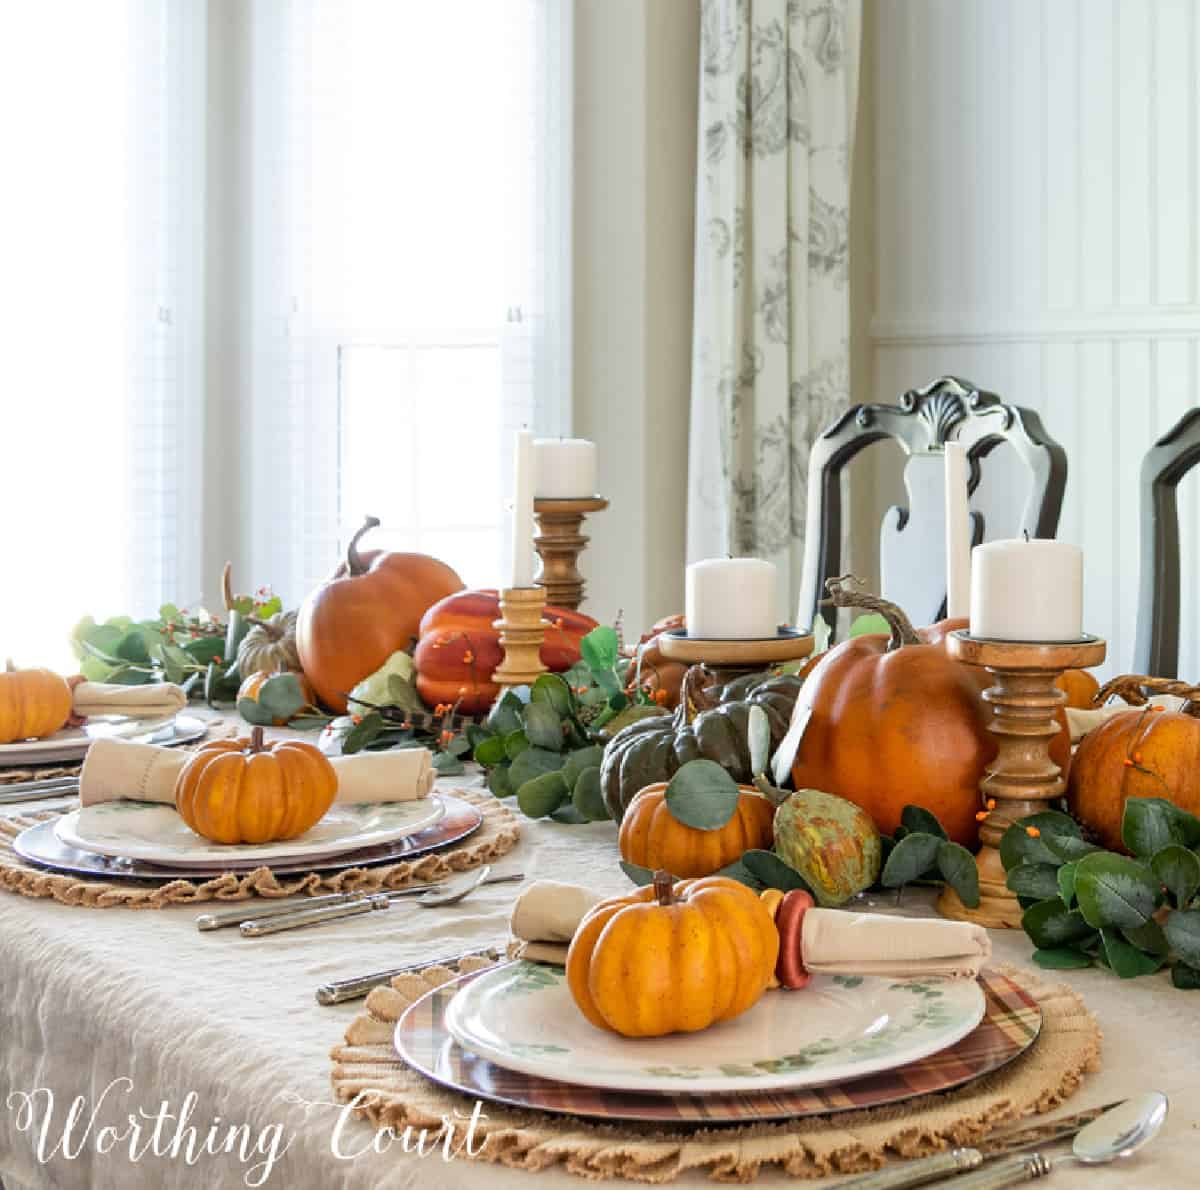 a Thanksgiving centerpiece using various sizes of faux pumpkins on a bed of eucalyptus leaves with wooden candle holders